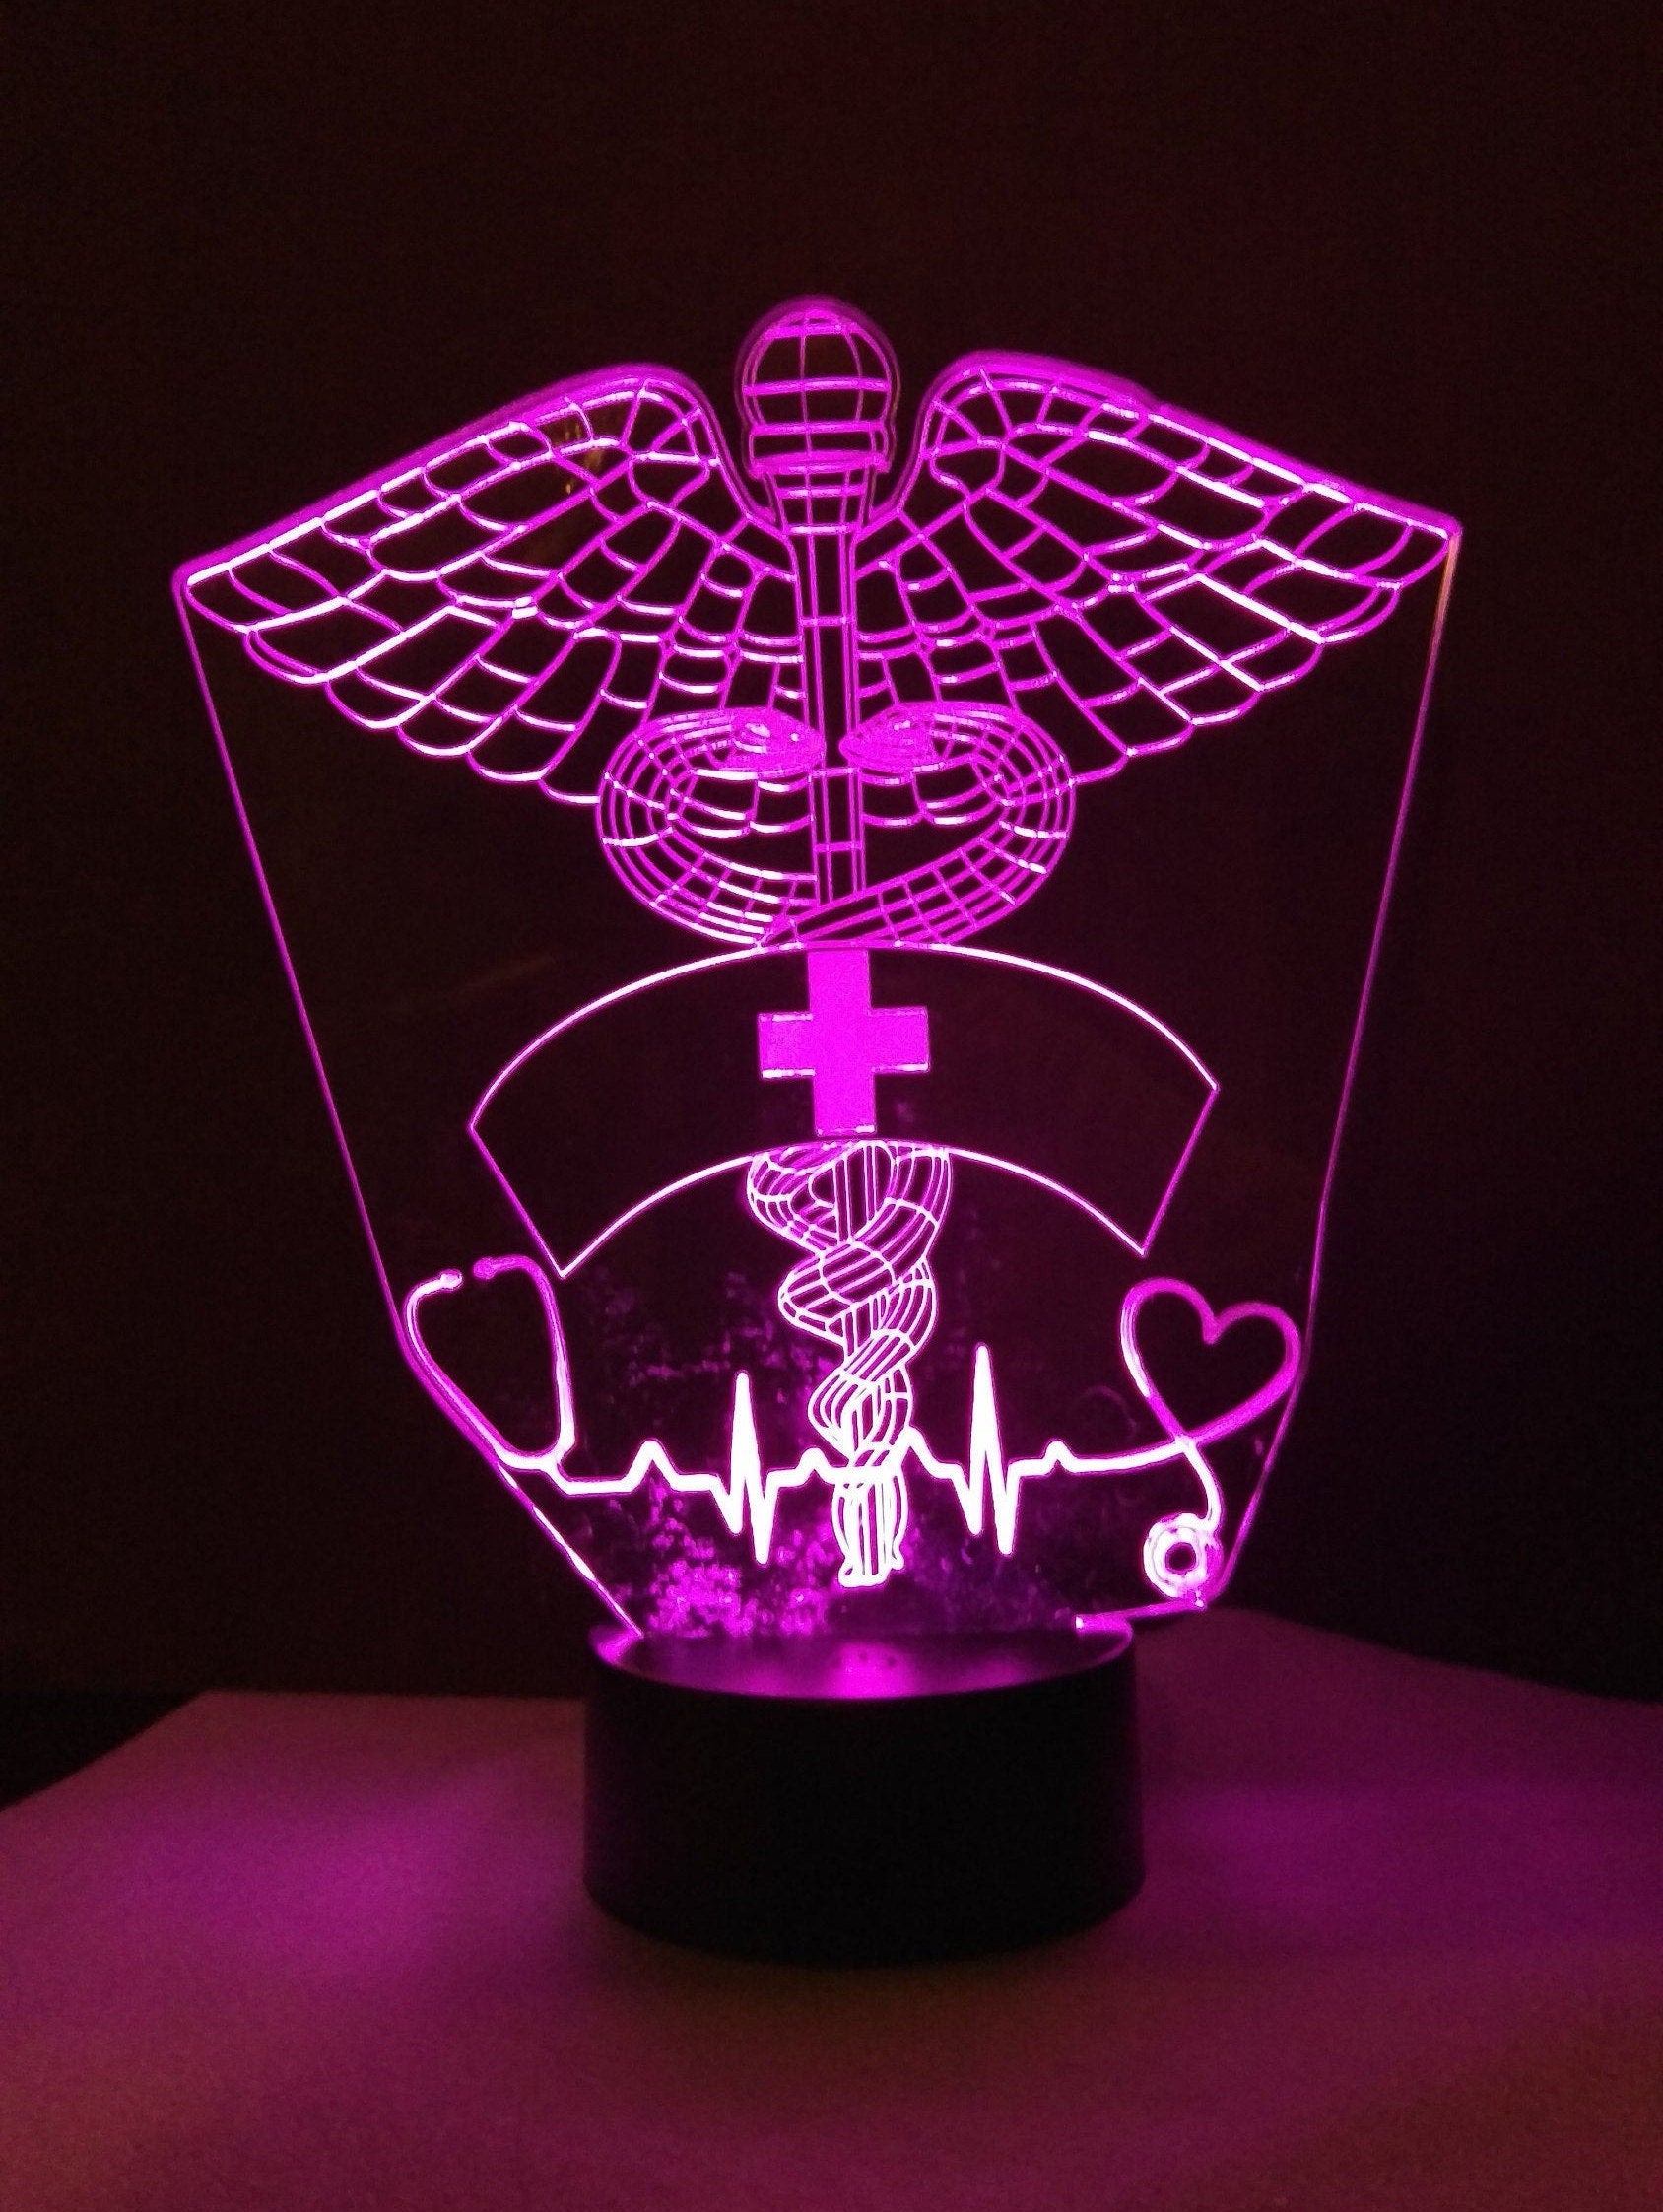 Awesome "Nurses are Essential" 3D LED Lamp (1203) - FREE SHIPPING!